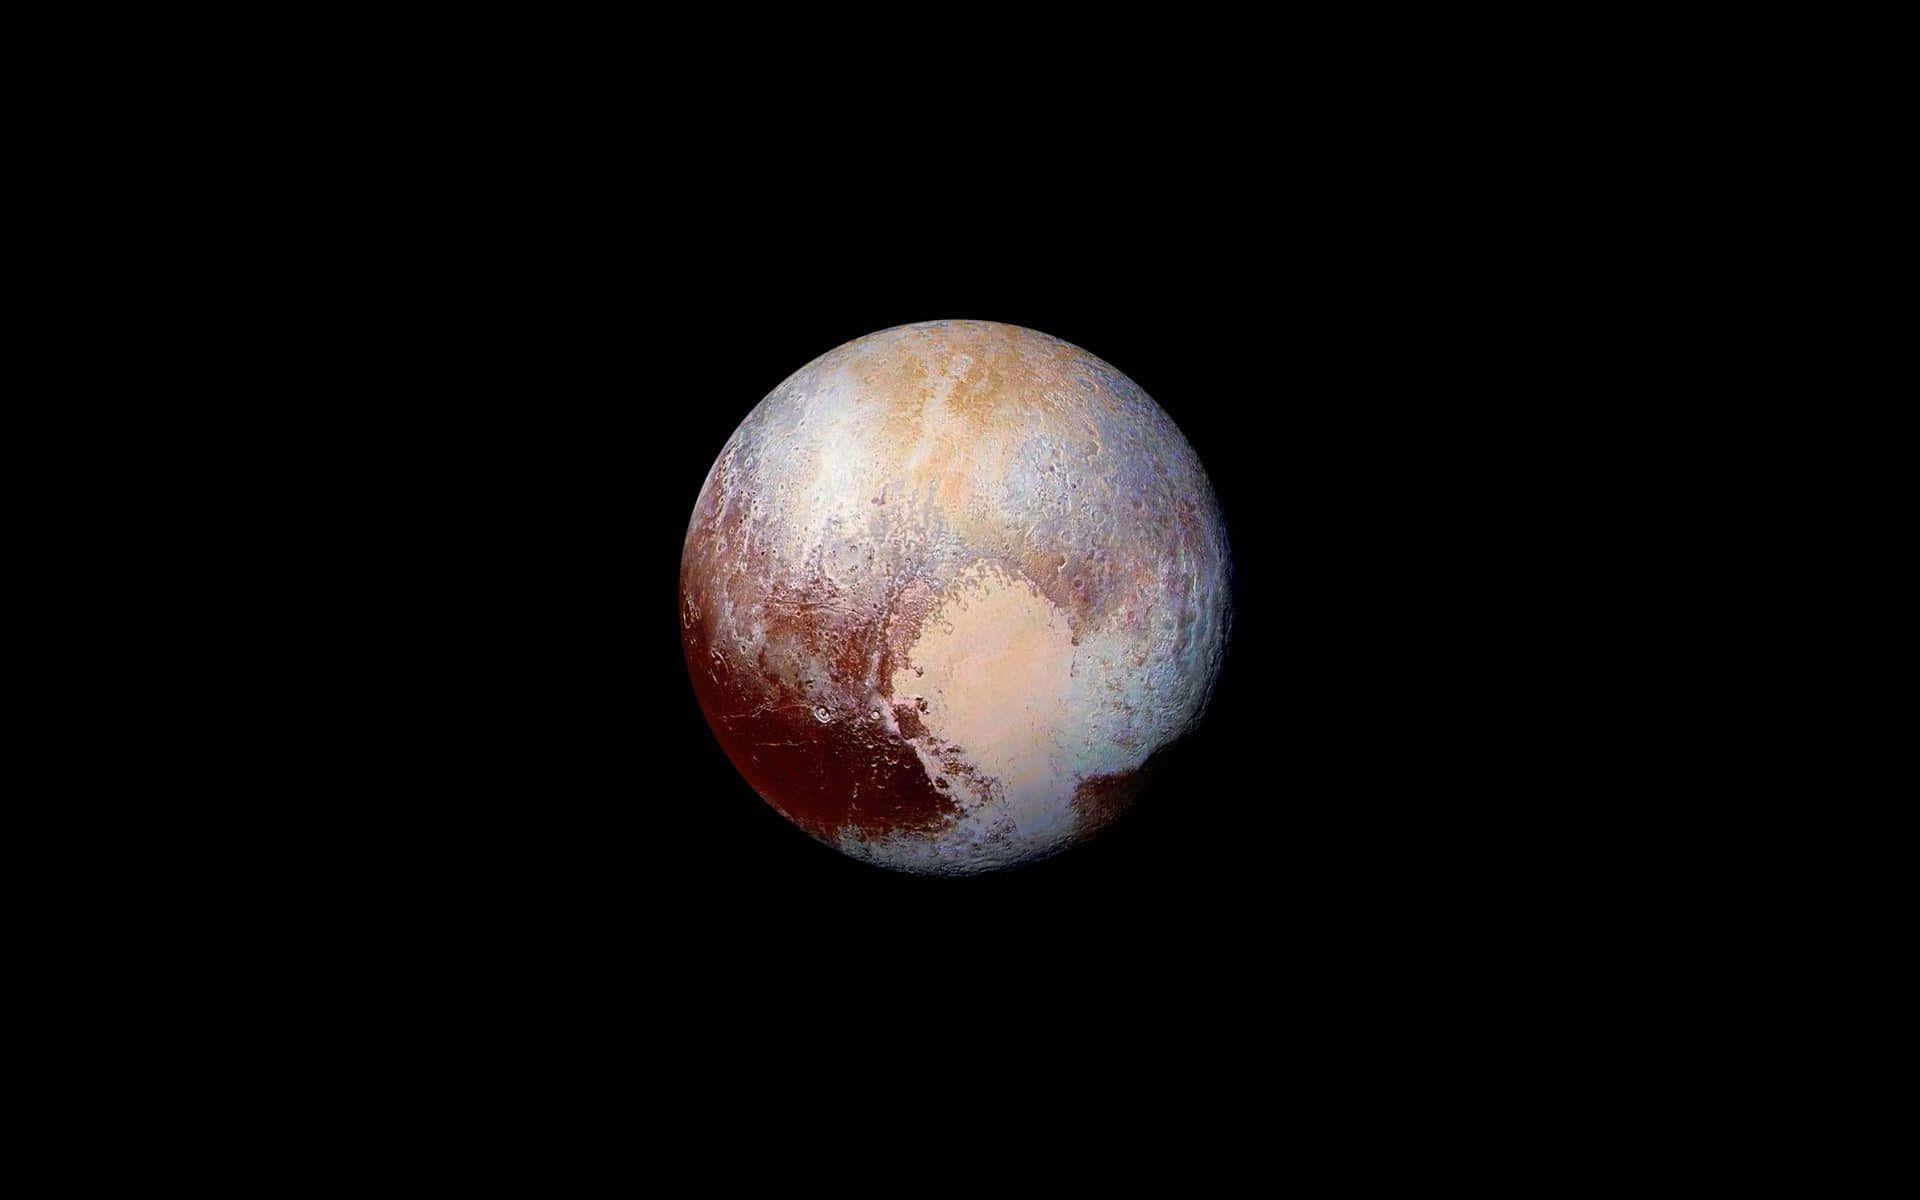 Take a closer look at Pluto with this stunning photo!